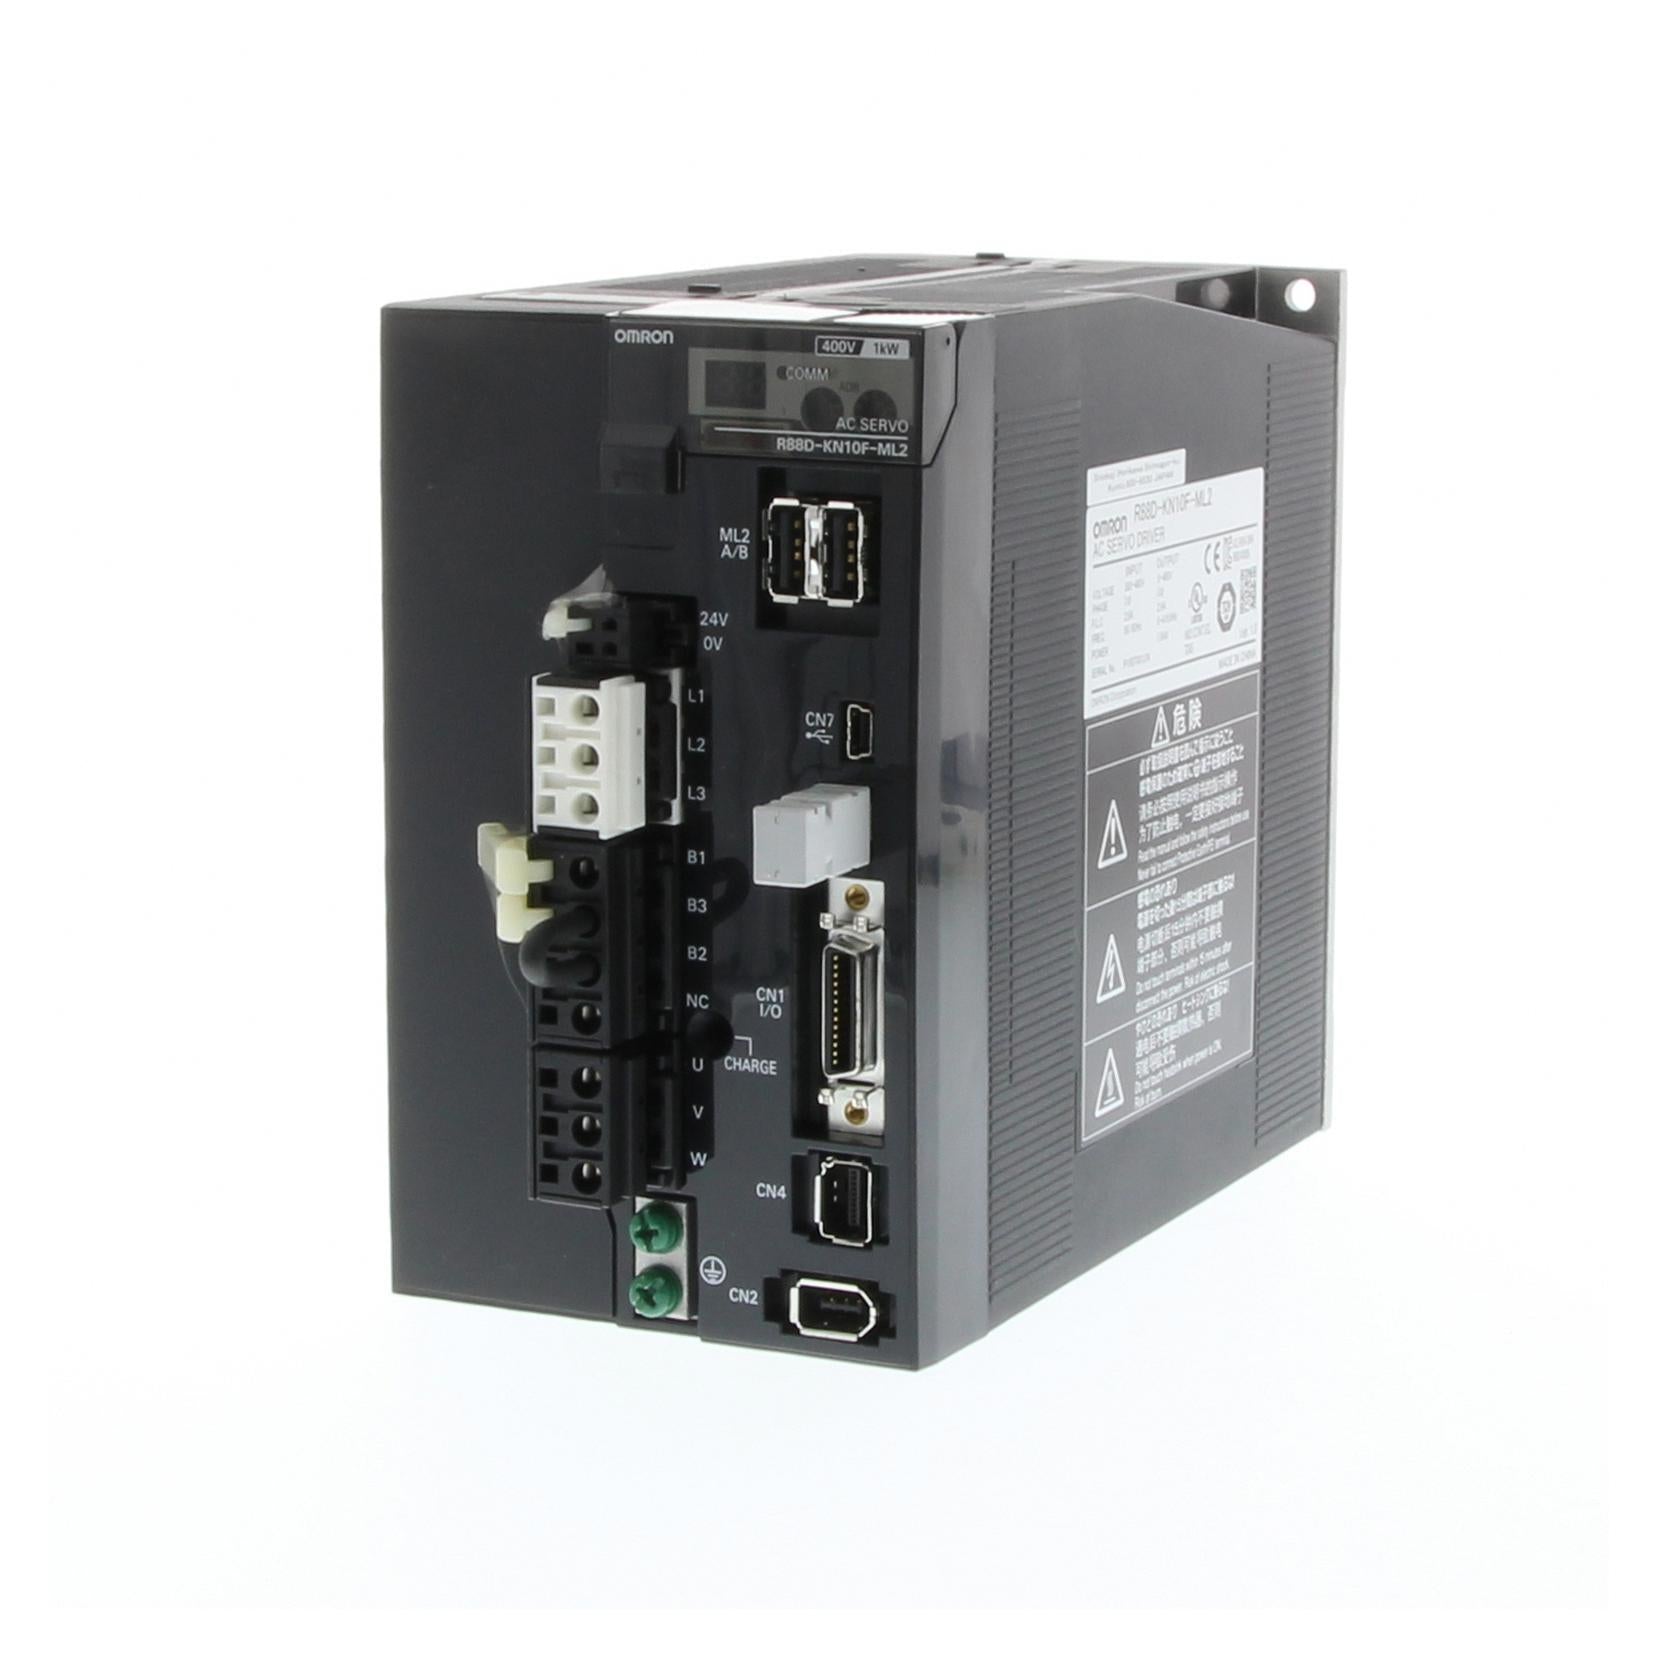 R88D-KN15H-ML2 AC MOTOR SPEED CONTROLLERS OMRON